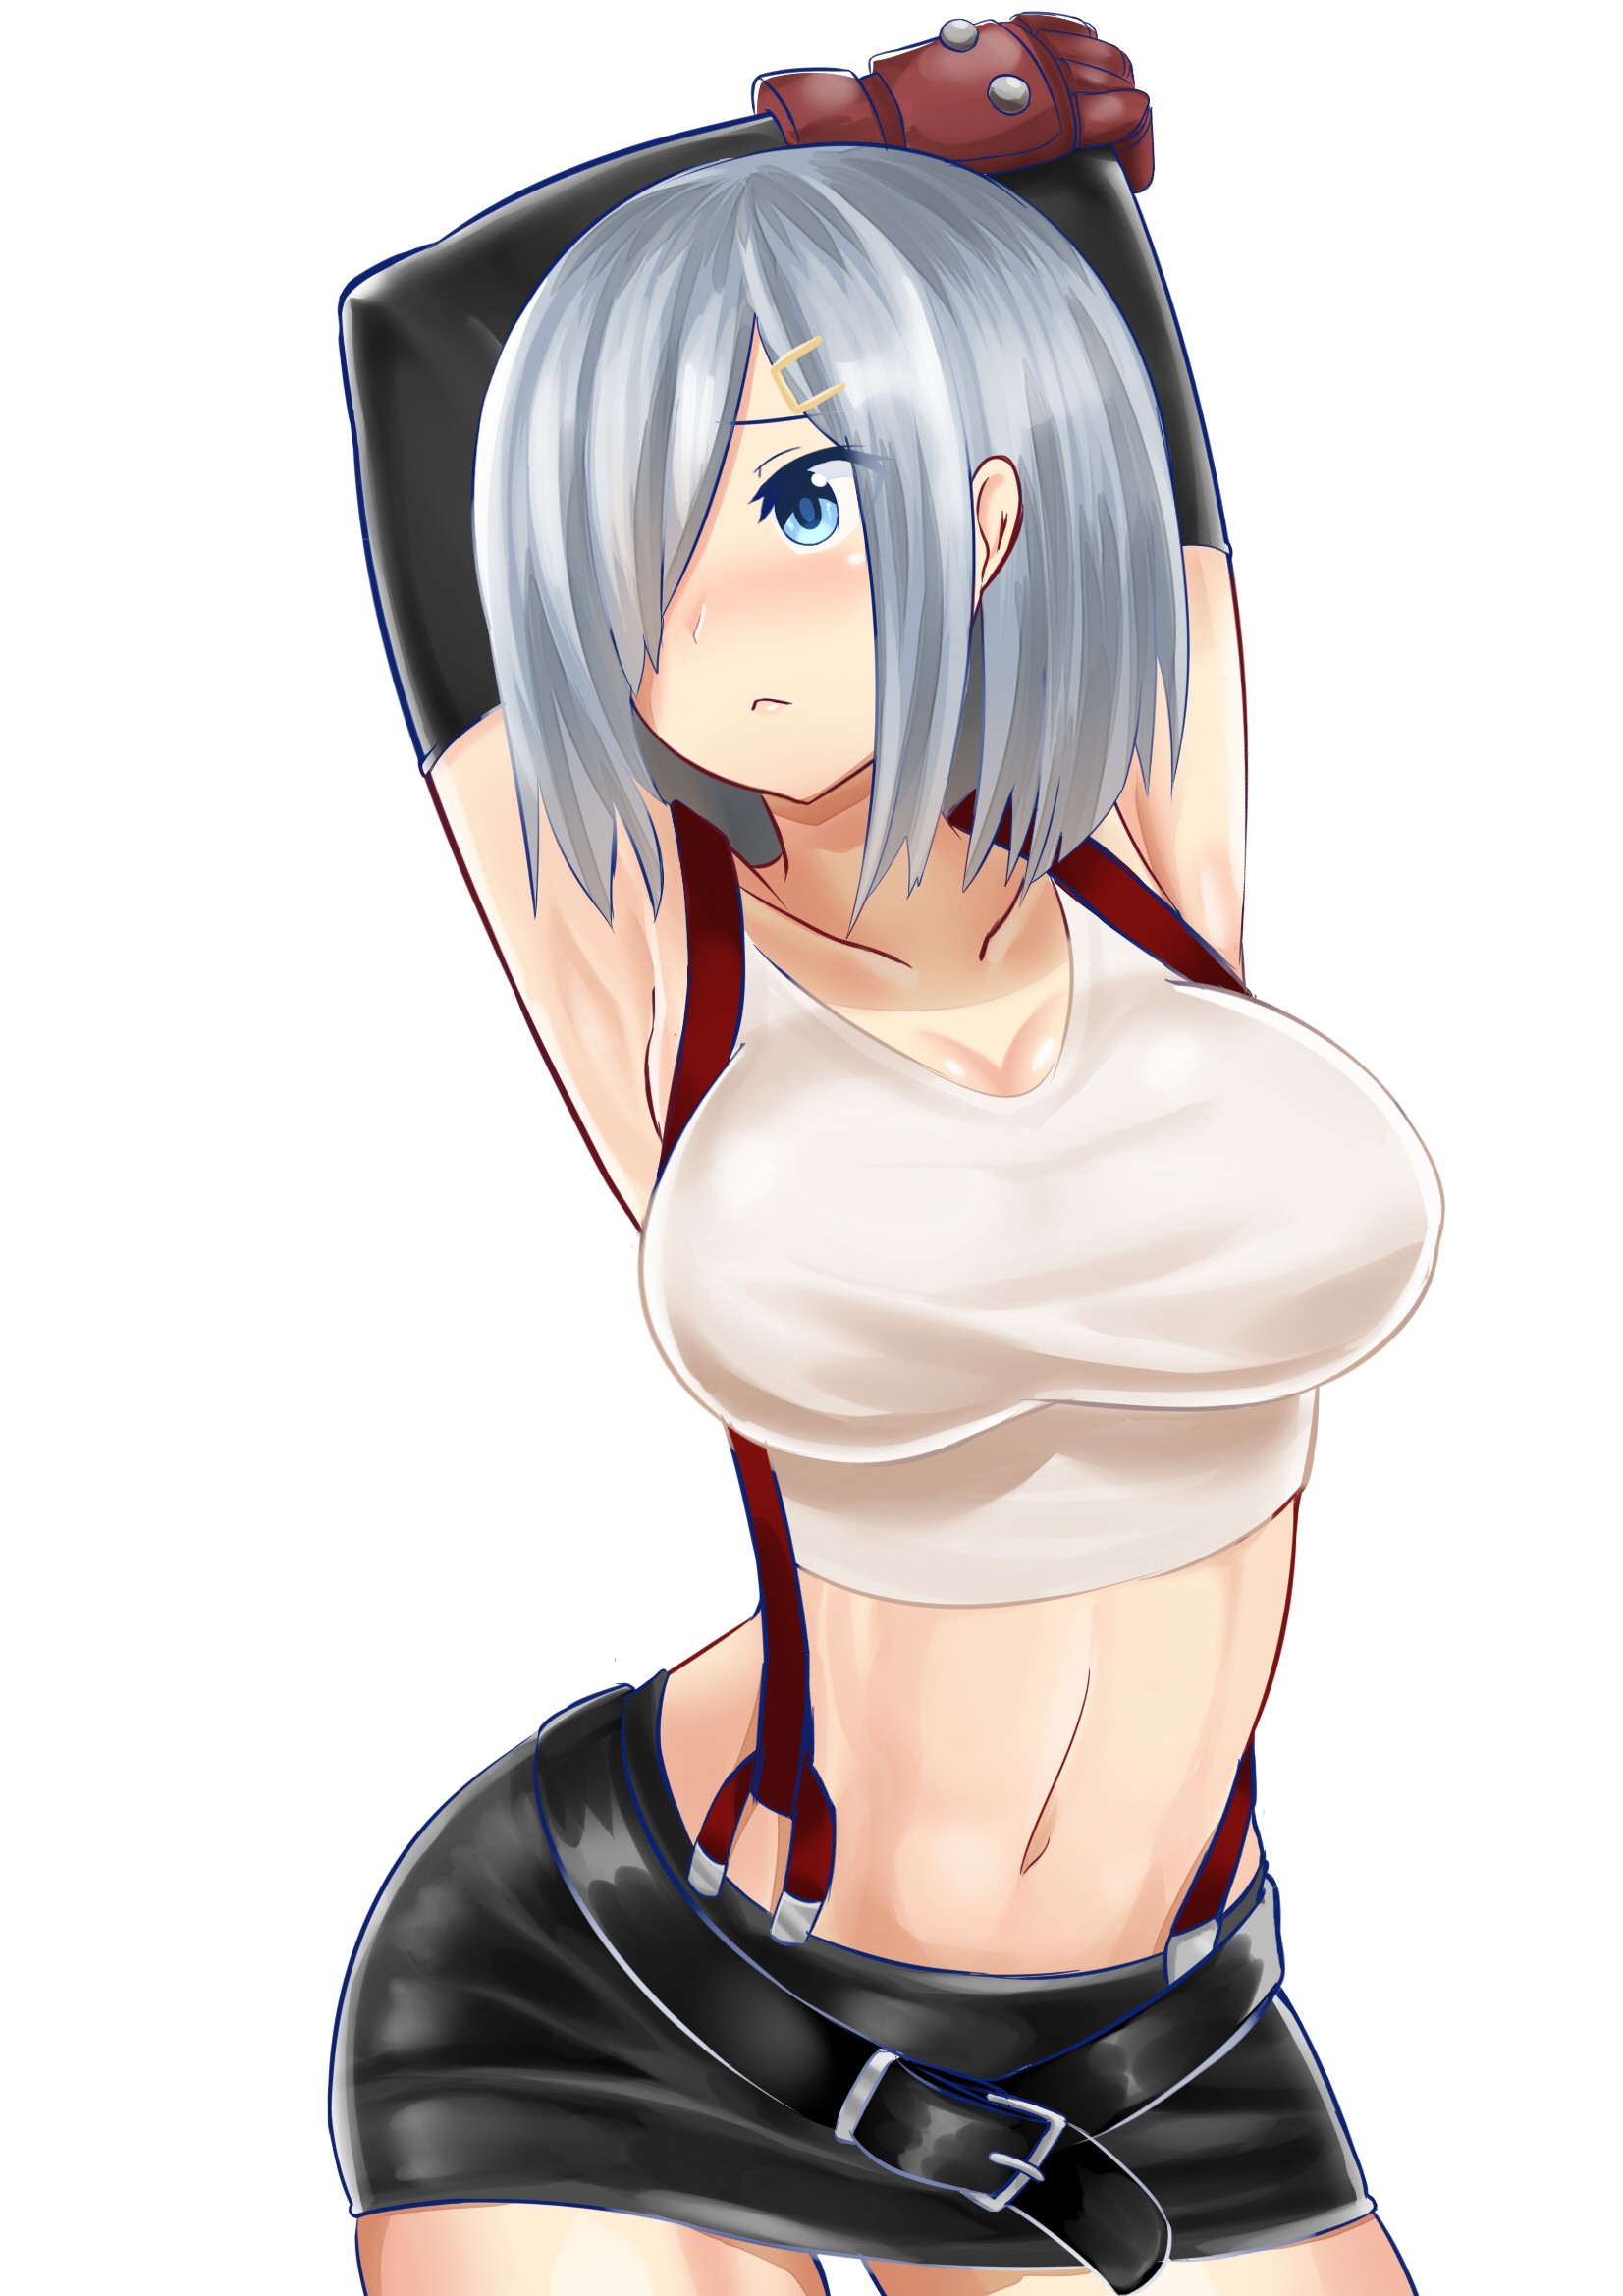 Anime 1653x2338 anime anime girls Kantai Collection Hamakaze (KanColle)  blue eyes crossover Tifa Lockhart boobs big boobs curvy Pixiv hair over one eye arms up white background simple background fantasy art fantasy girl Final Fantasy video game girls fan art belly miniskirt gloves